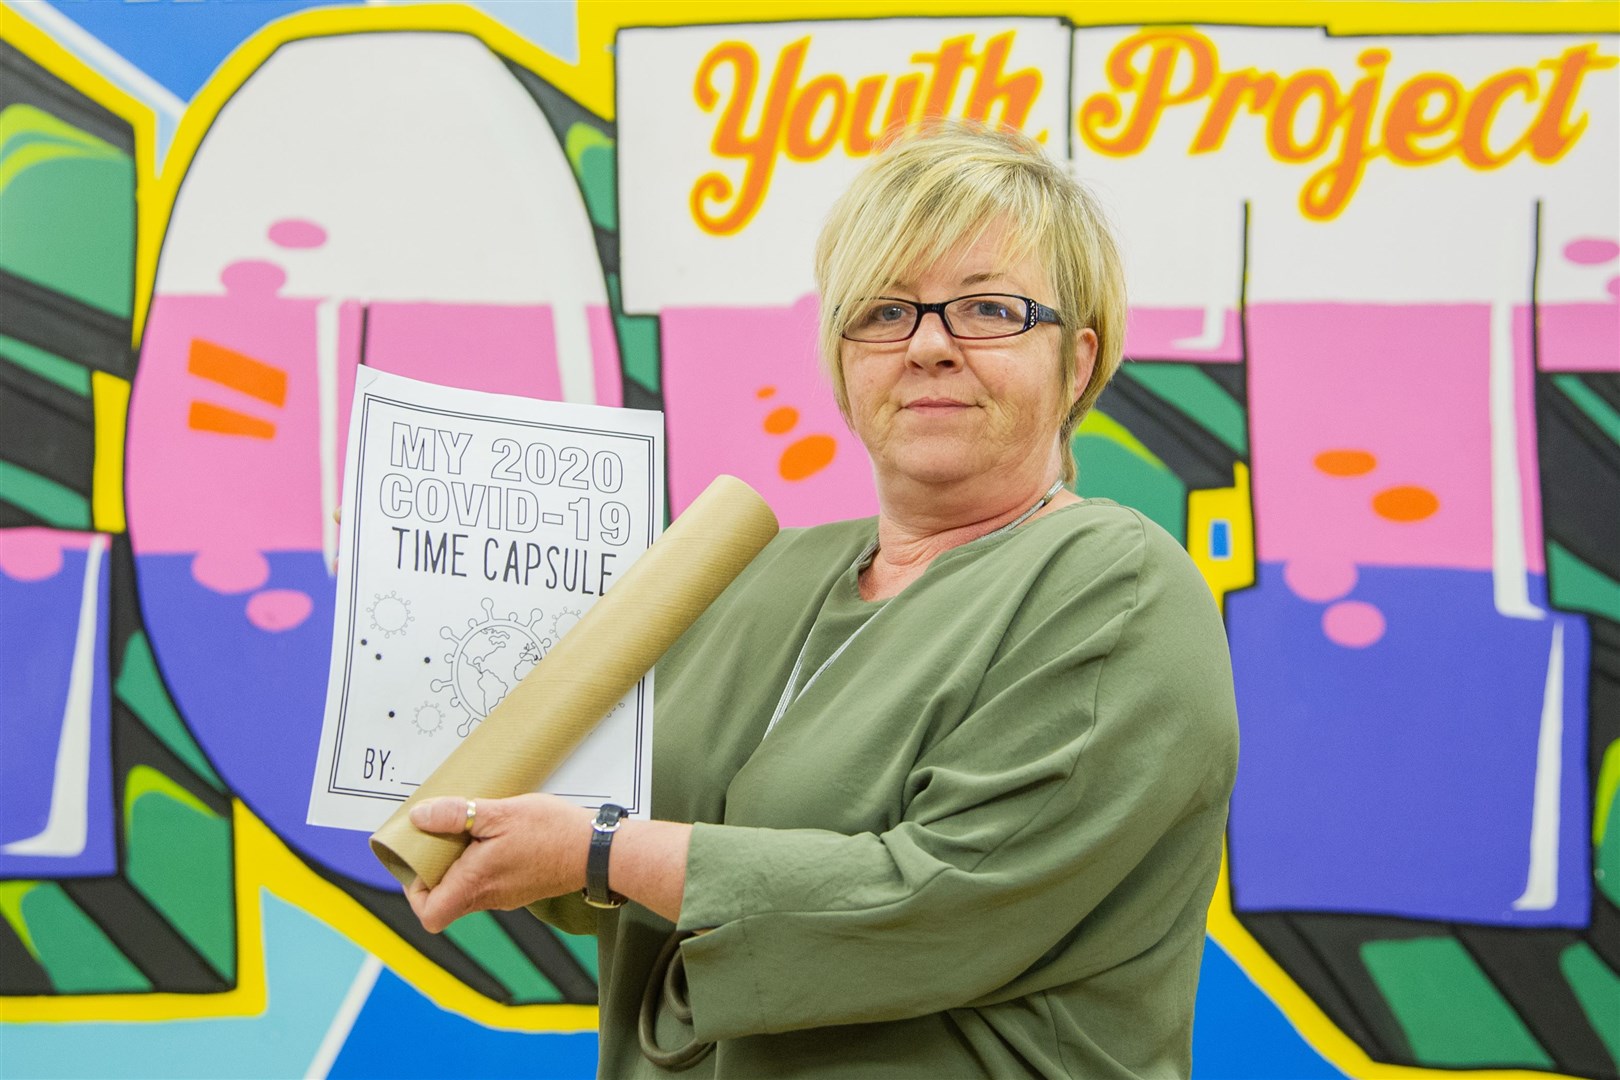 Sharon Duncan, from the Keith Loft Youth Project, has organised the delivery of lockdown time capsules to local families. Picture: Daniel Forsyth.